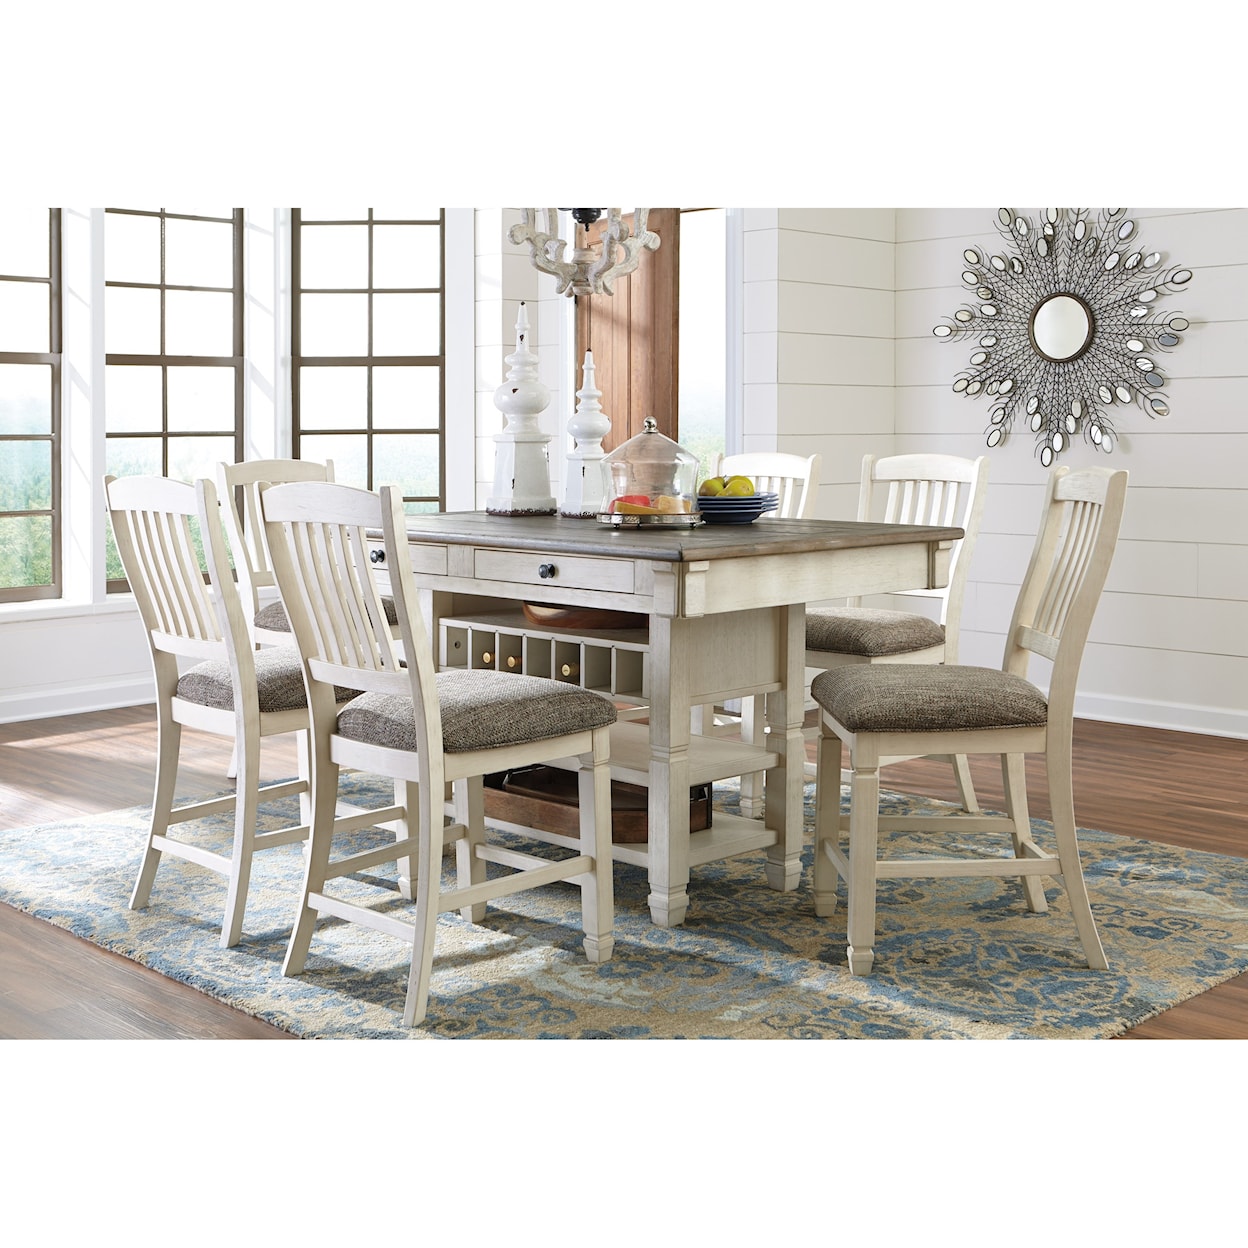 Signature Design by Ashley Bolanburg Rectangular Dining Room Counter Table